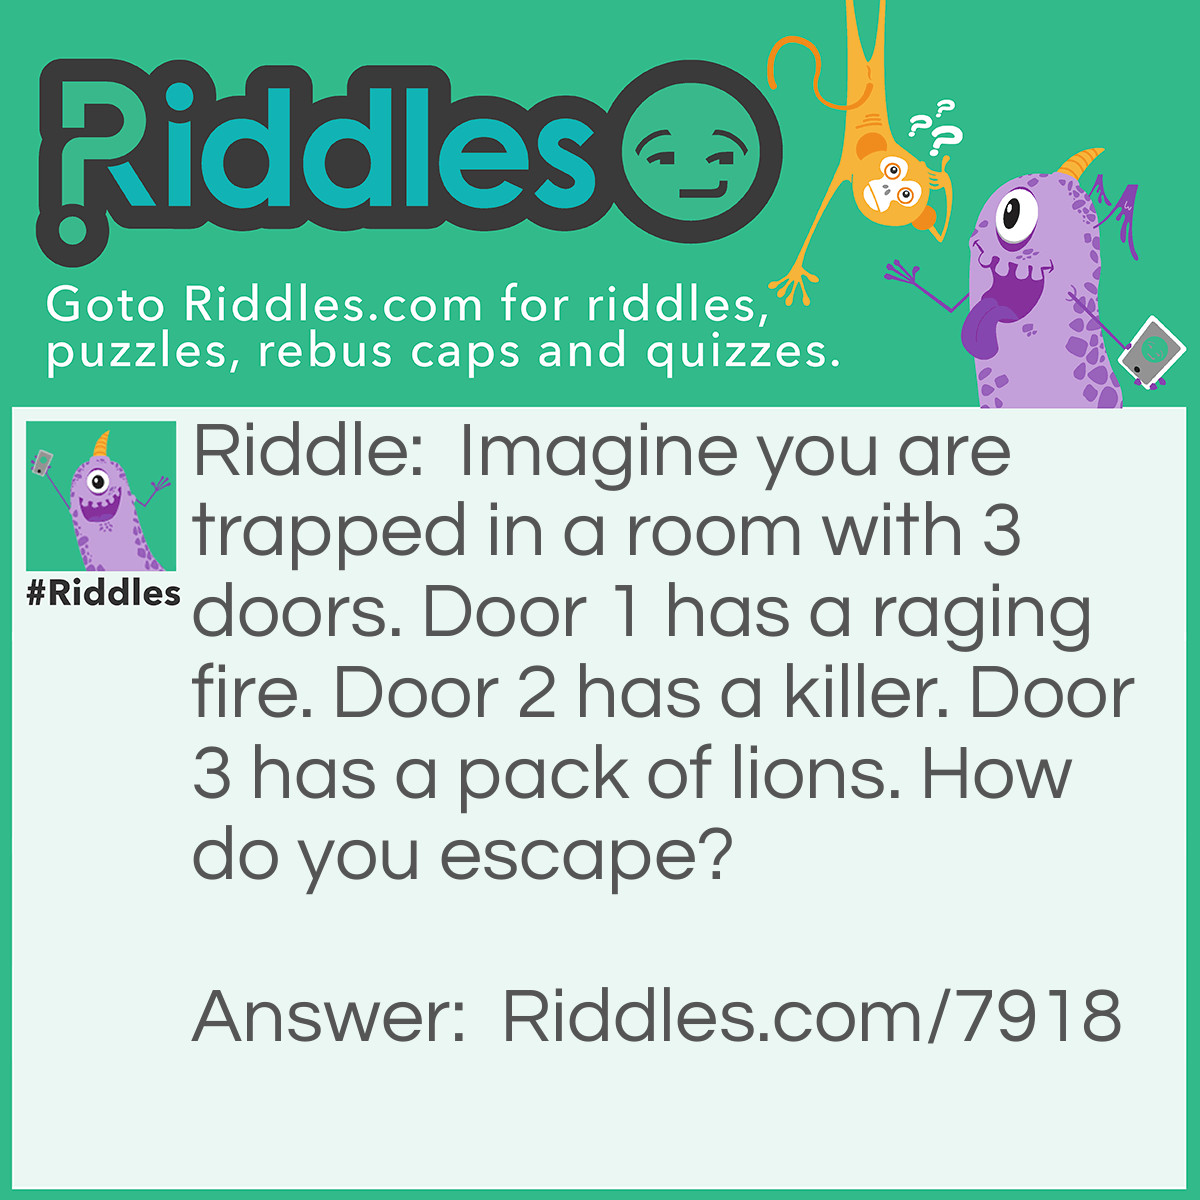 Riddle: Imagine you are trapped in a room with 3 doors. Door 1 has a raging fire. Door 2 has a killer. Door 3 has a pack of lions. How do you escape? Answer: Stop imagining!